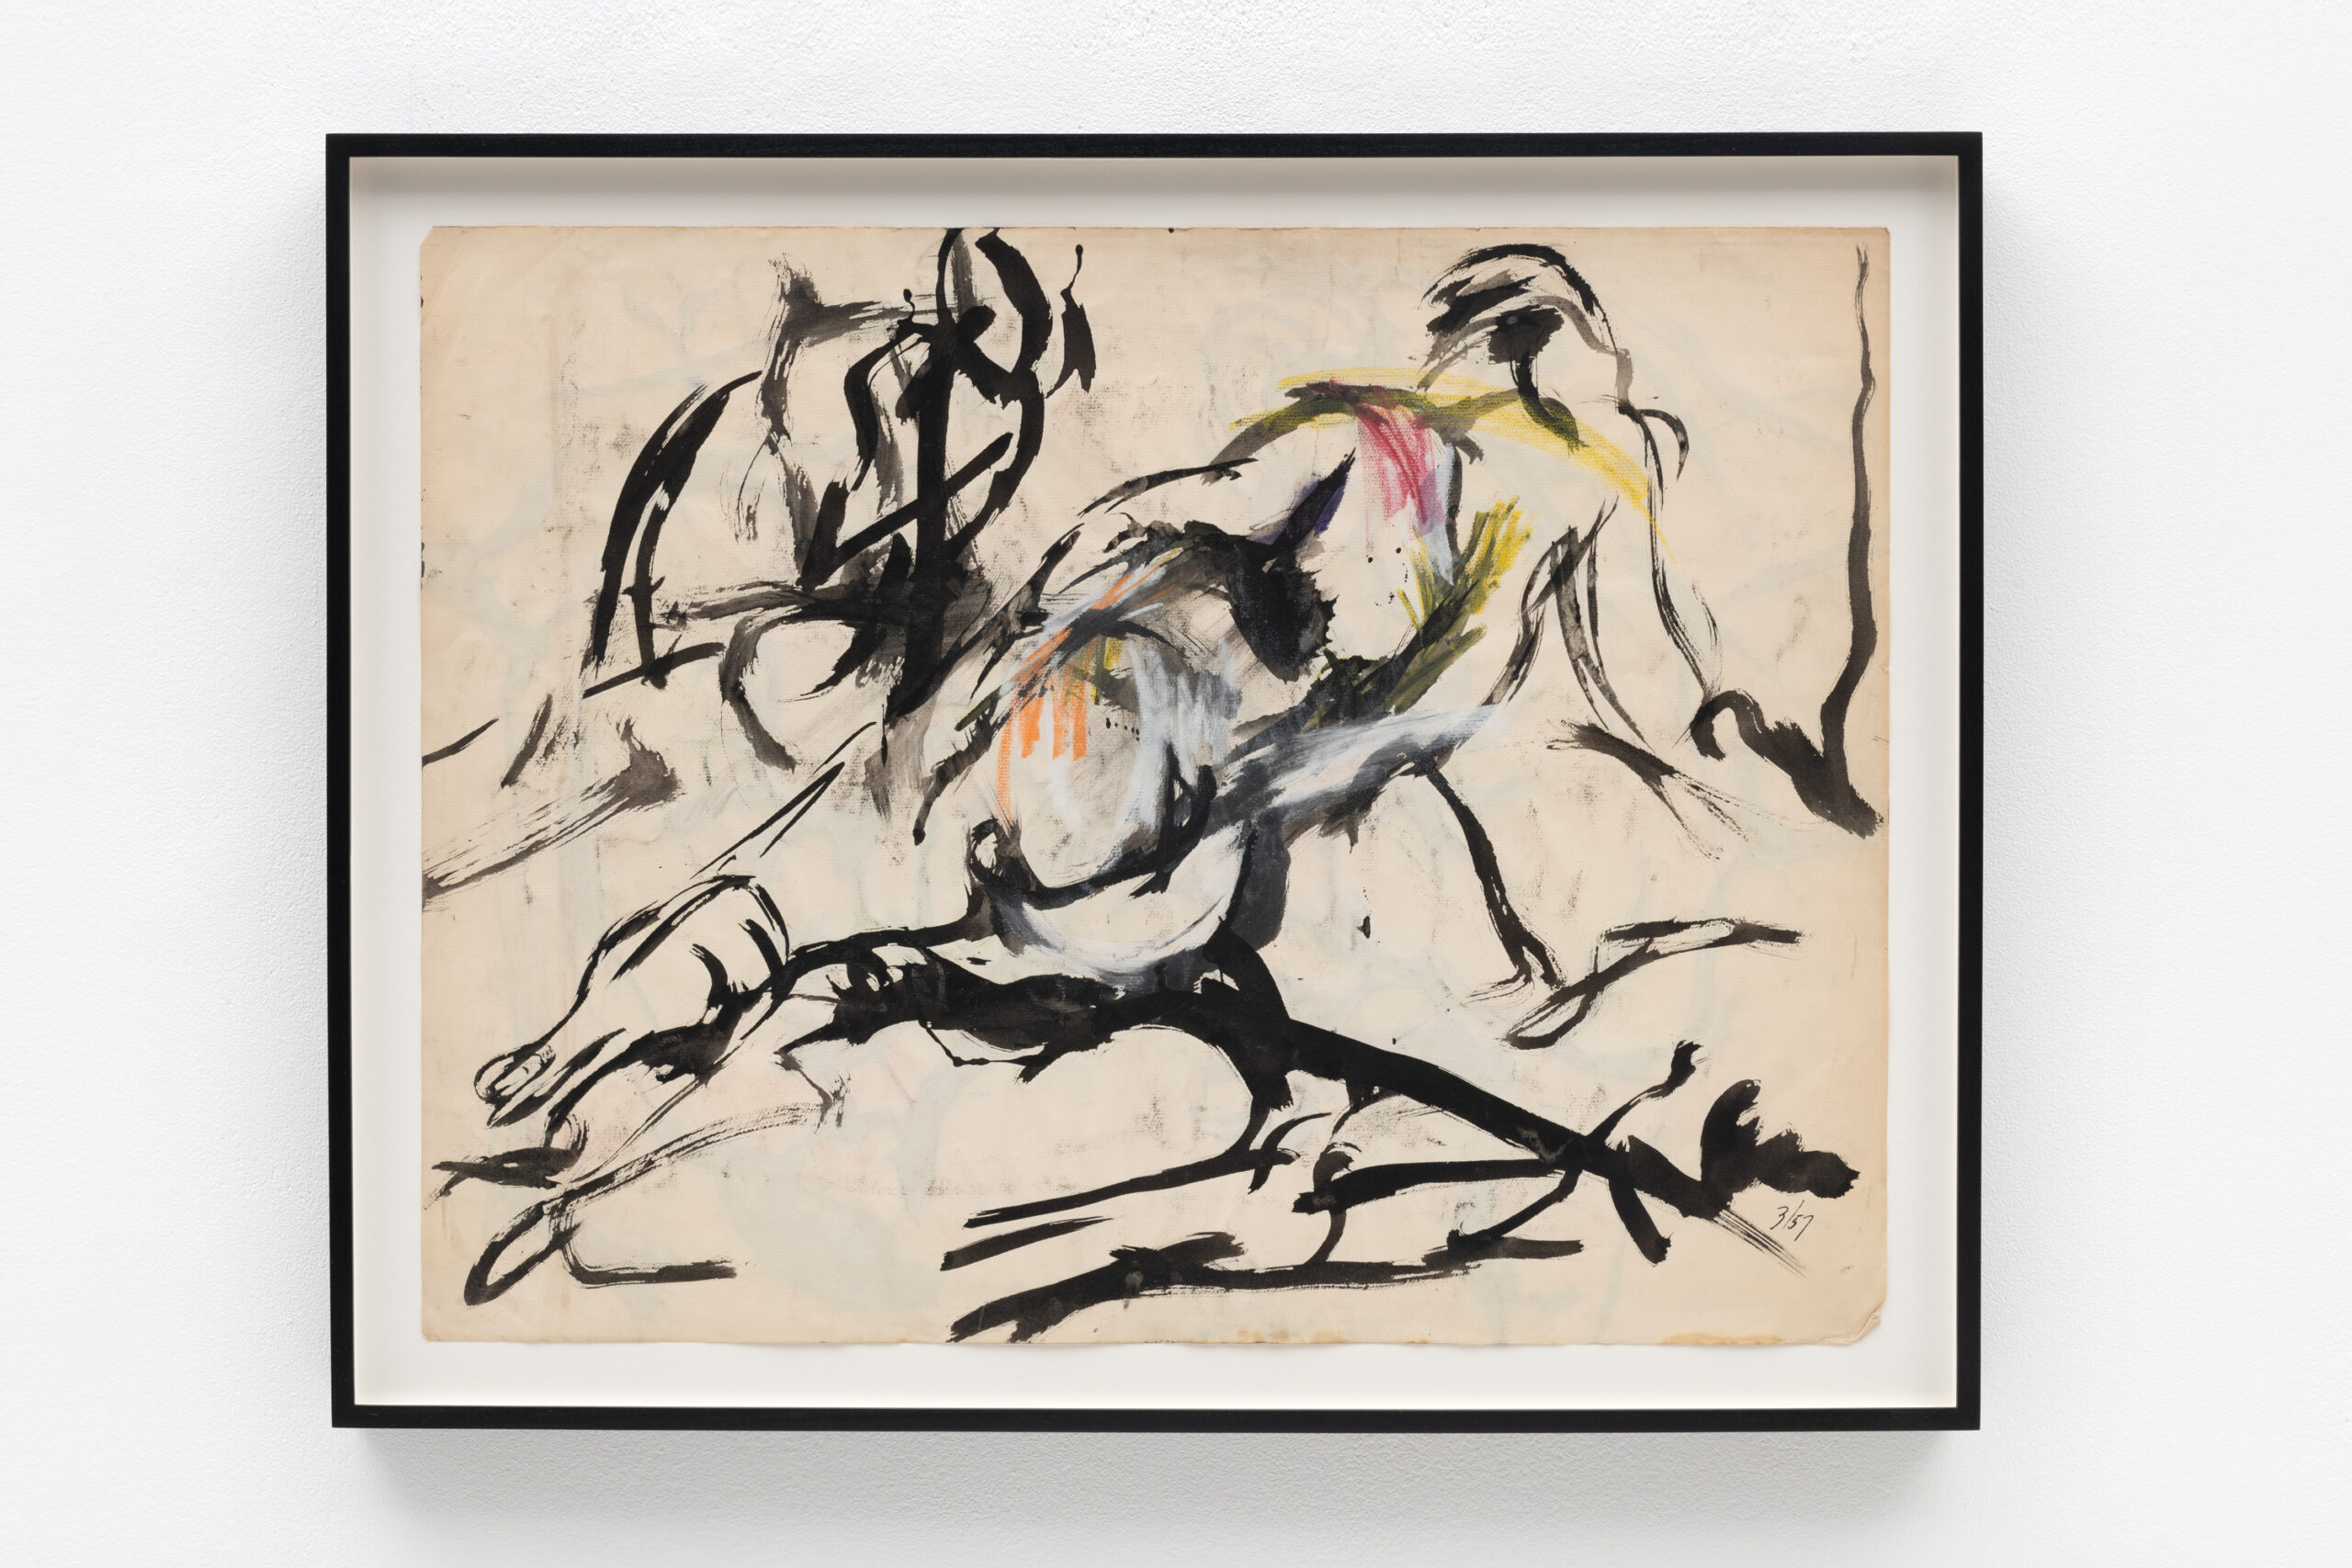 Carolee Schneemann, Action Drawing II, 1957, Ink and crayon on paper, Framed 55.7 x 71 x 3.9 cm, 21 7_8 x 28 x 1 1_2 in, C_SCH0248, Photo by Charlie Littlewood